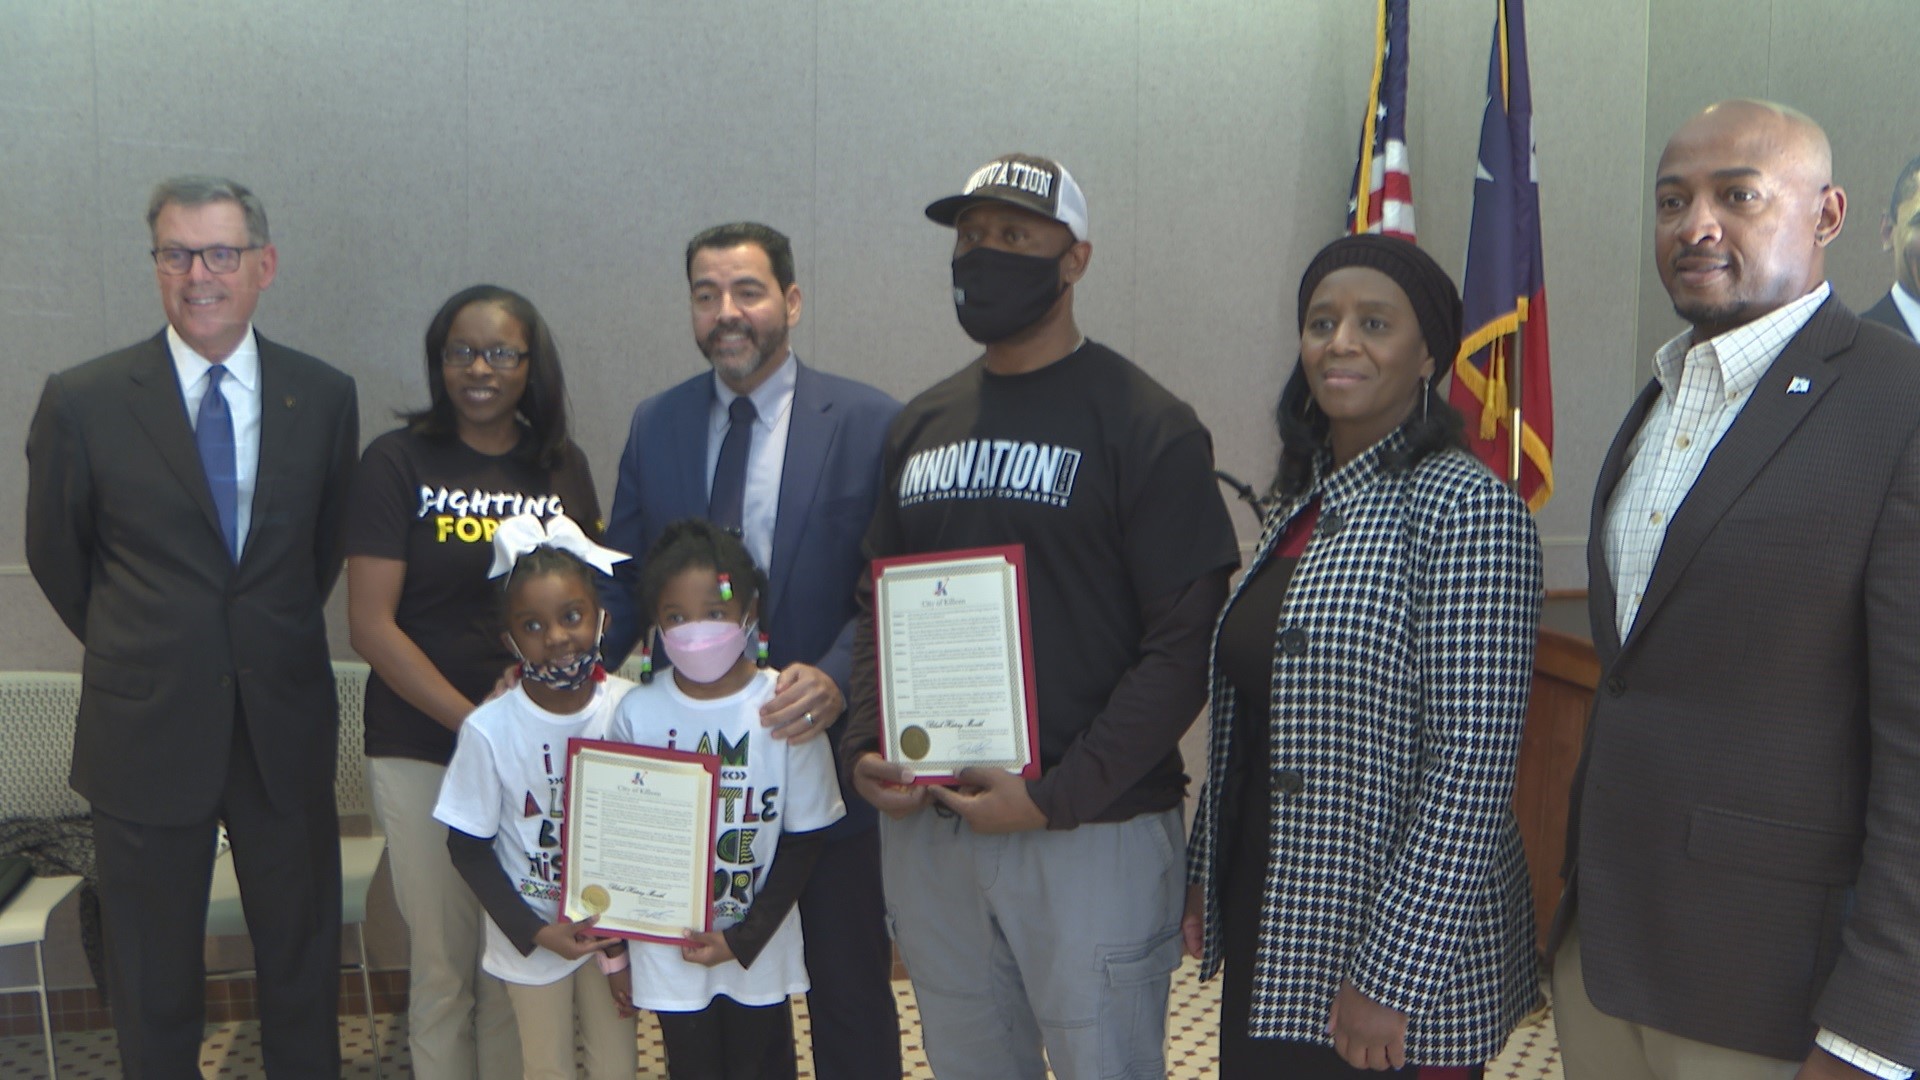 The City of Killeen is doing its part to recognize the contributions of African Americans in the local community.